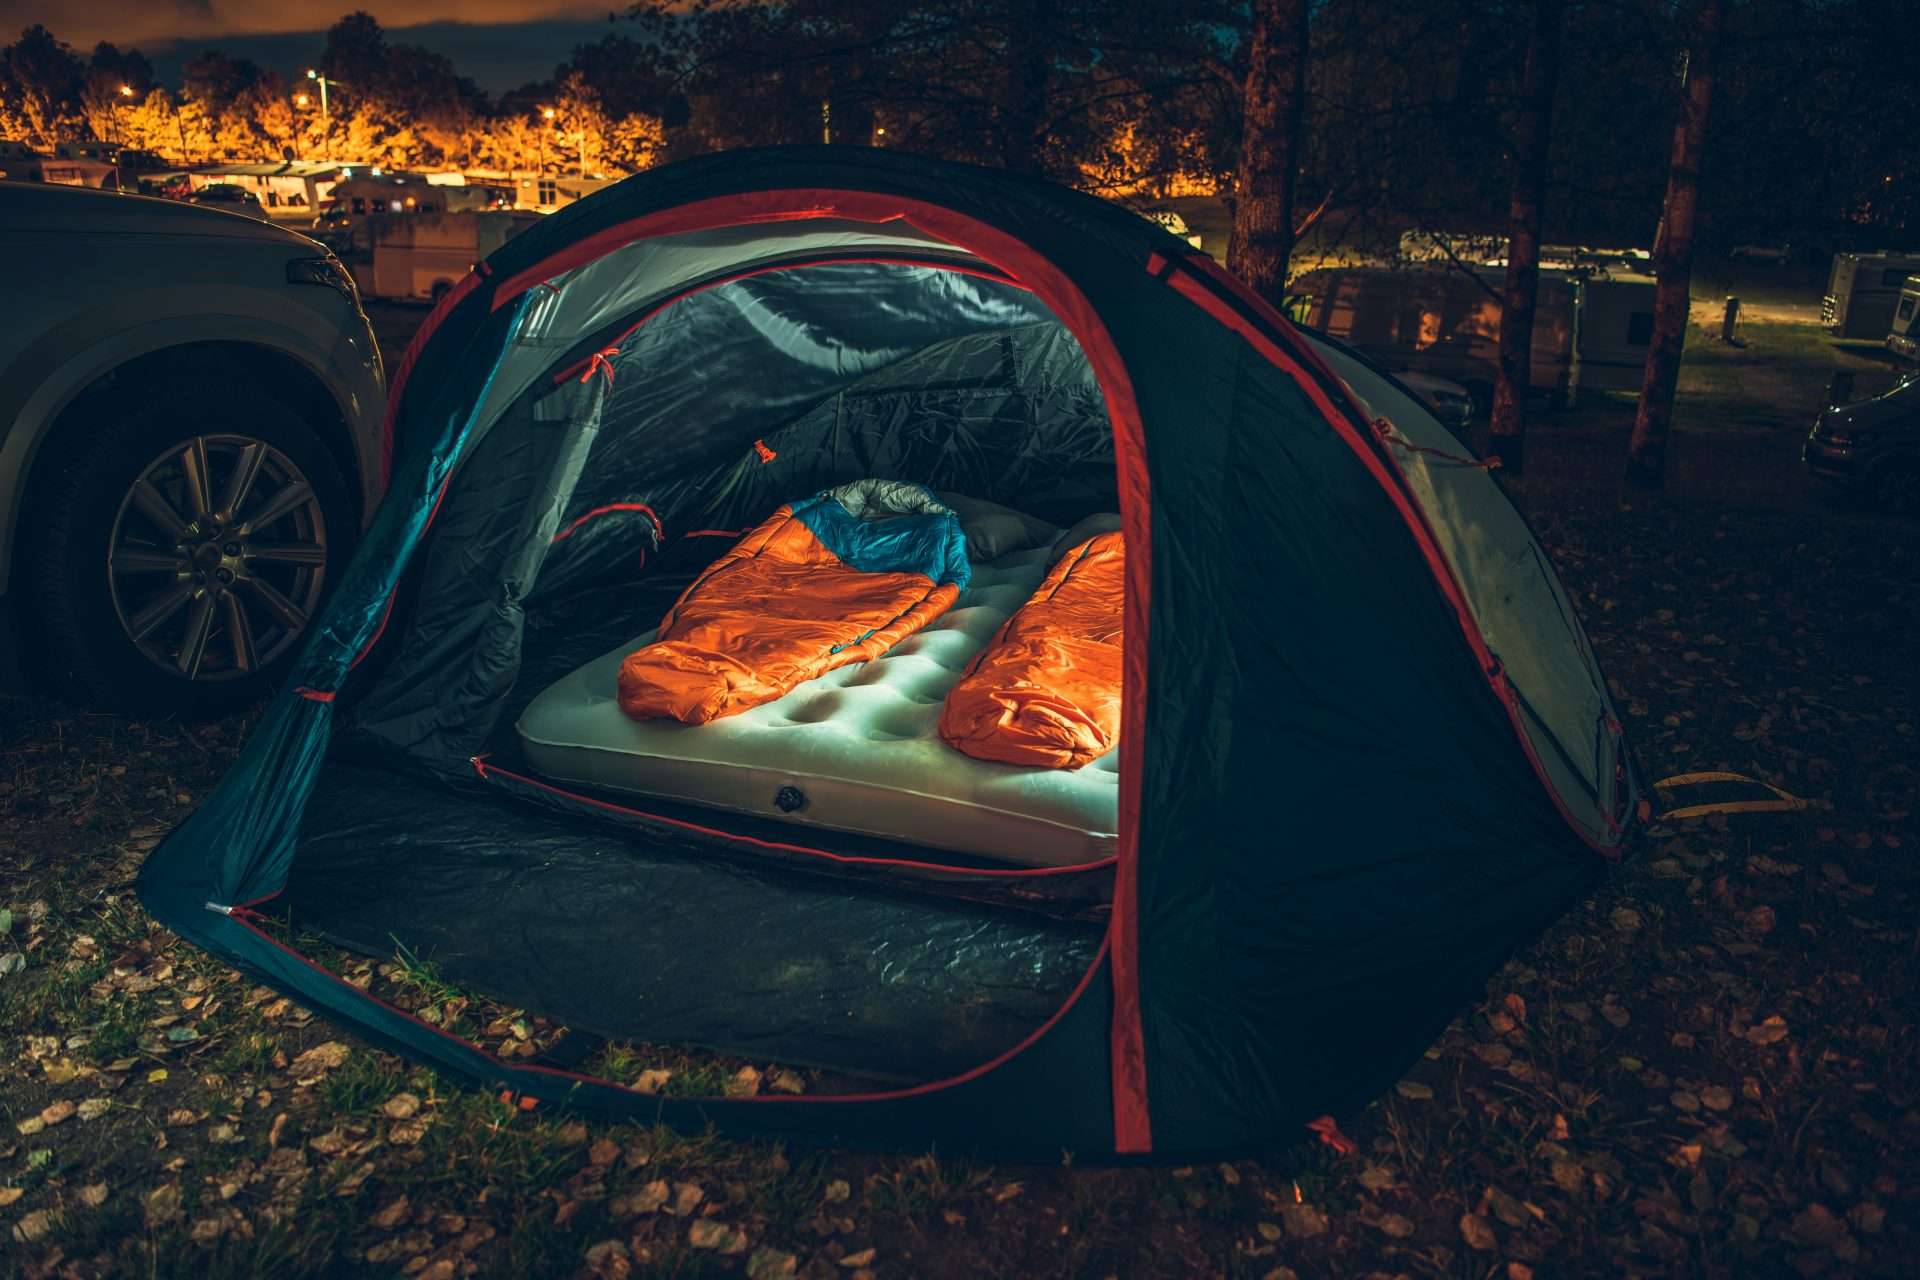 Two person pop-up tent camping set up